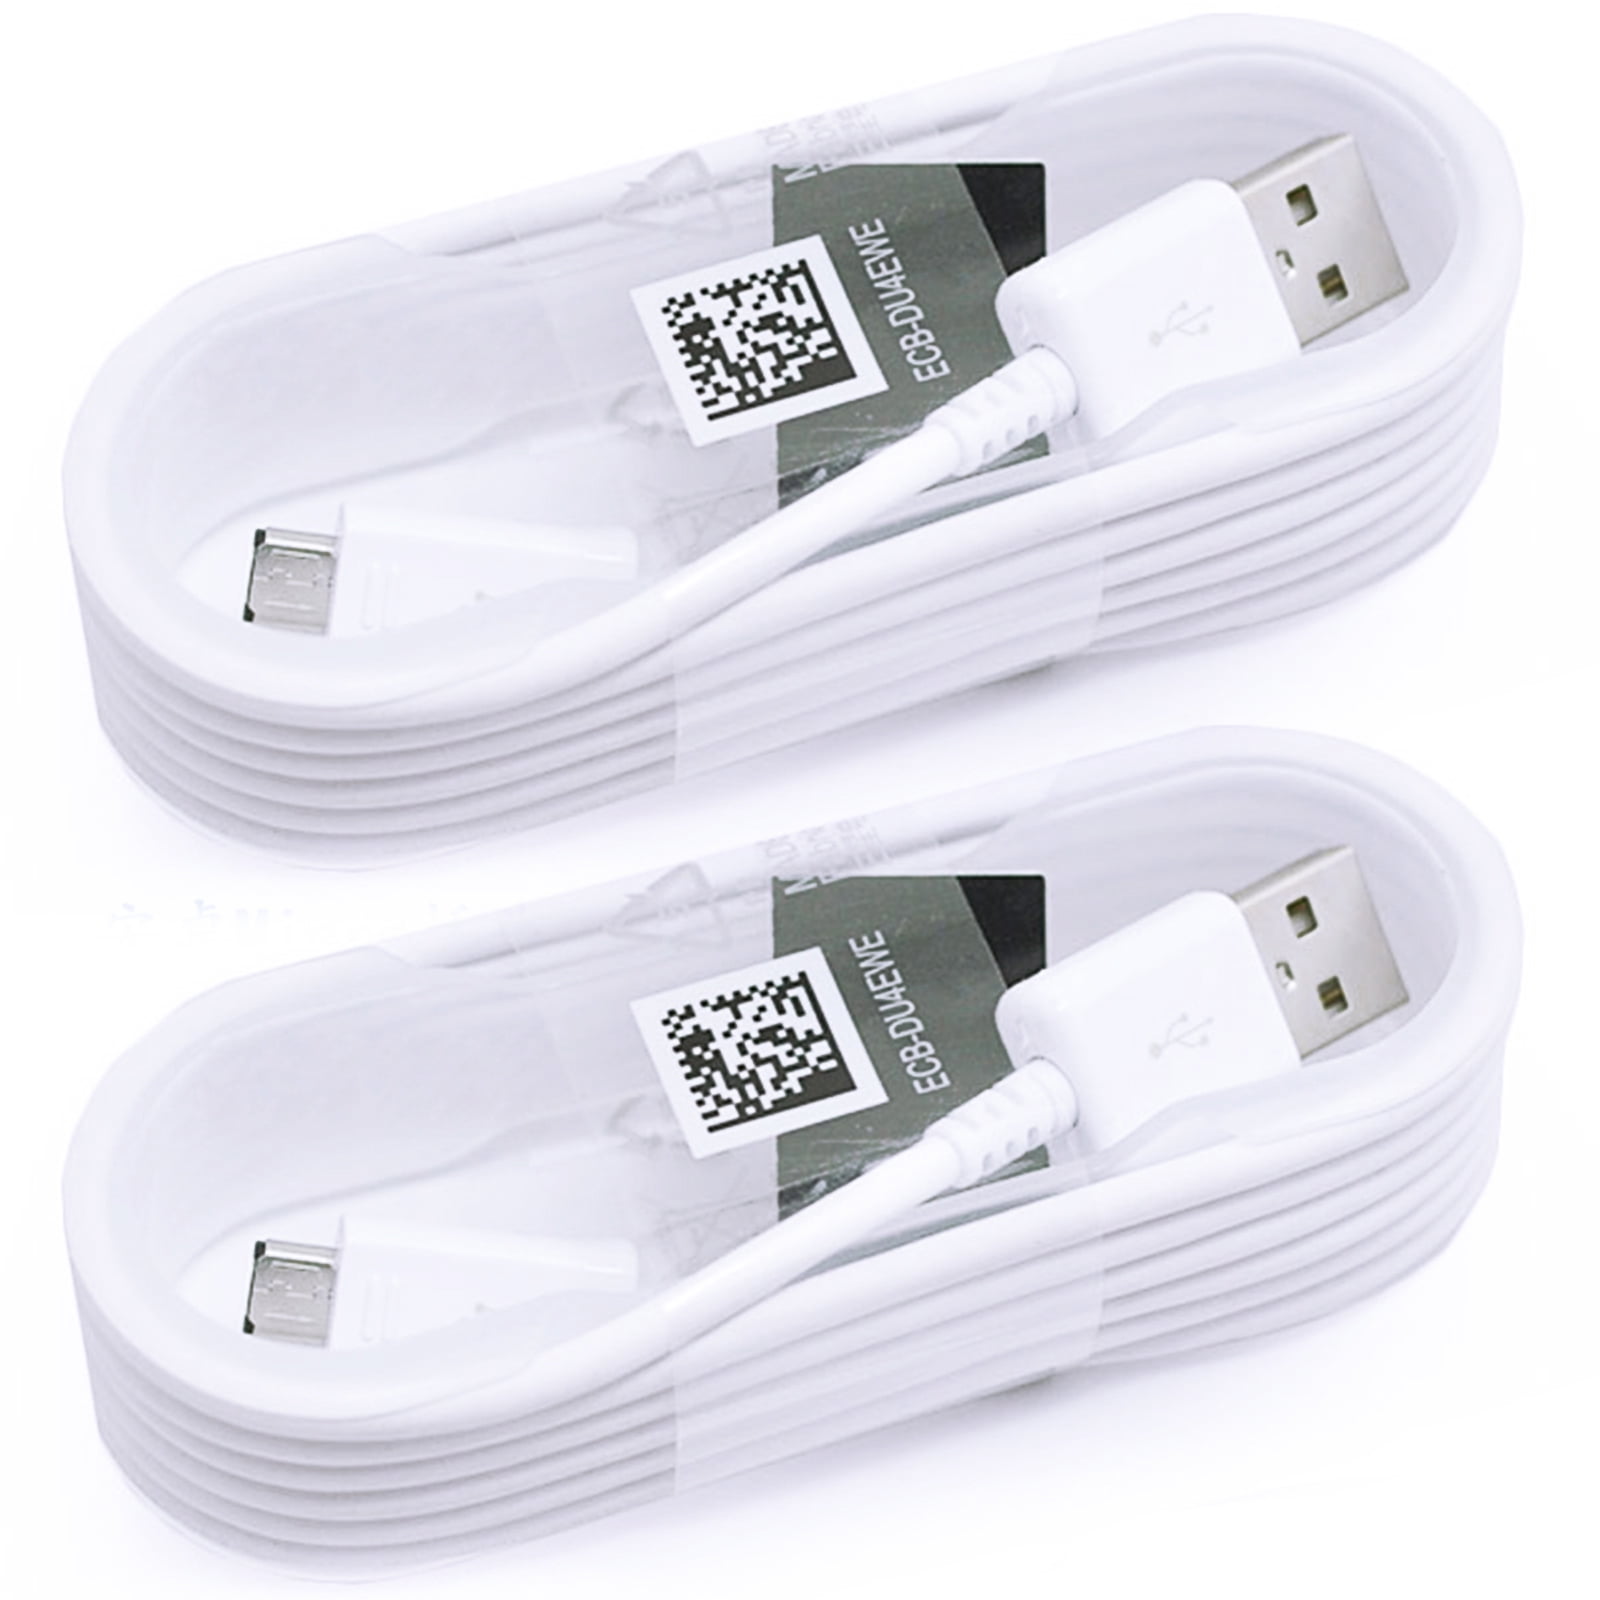 2-Pack OEM Original Samsung Micro USB Cable Fast Charging Charger Data Sync Cable Cord for Samsung Galaxy Note 4, Edge, S3, S4, S6 and S6 Edge, 1.5 Meter / 5 Foot (White)